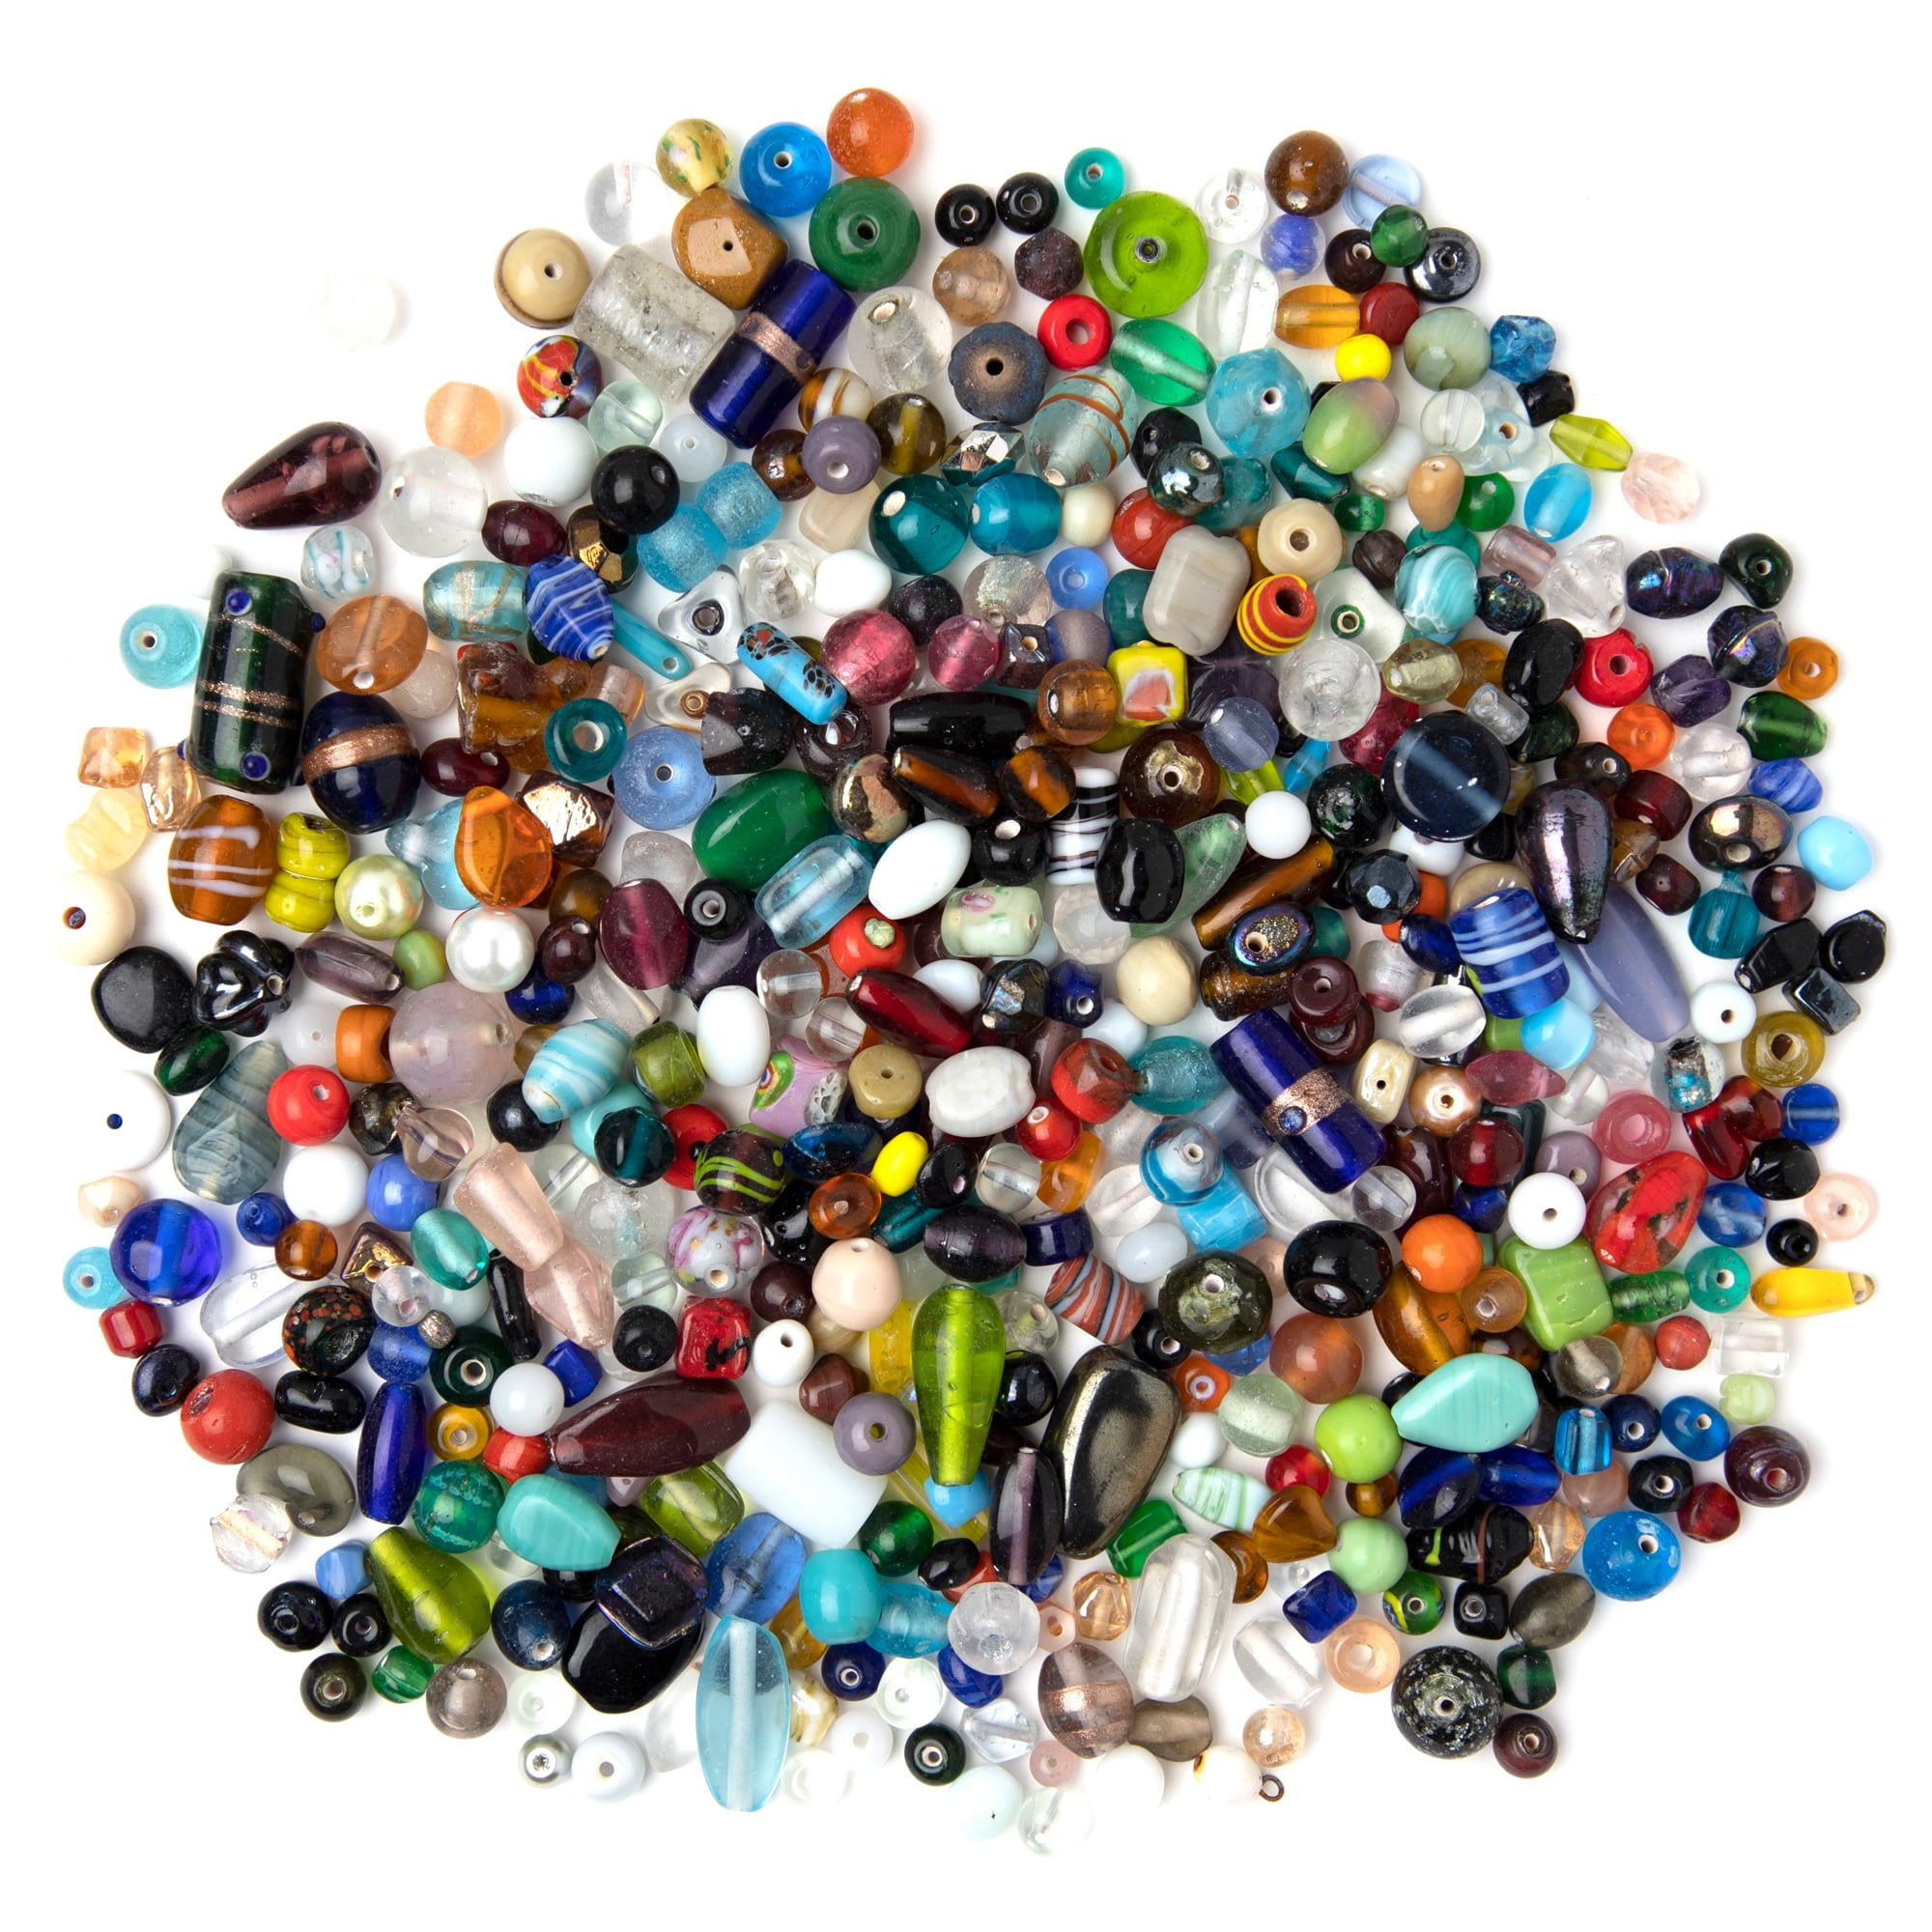 1lb=454g Bulk Assorted Shapes and Sizes 6-12mm Glass Beads Mixed